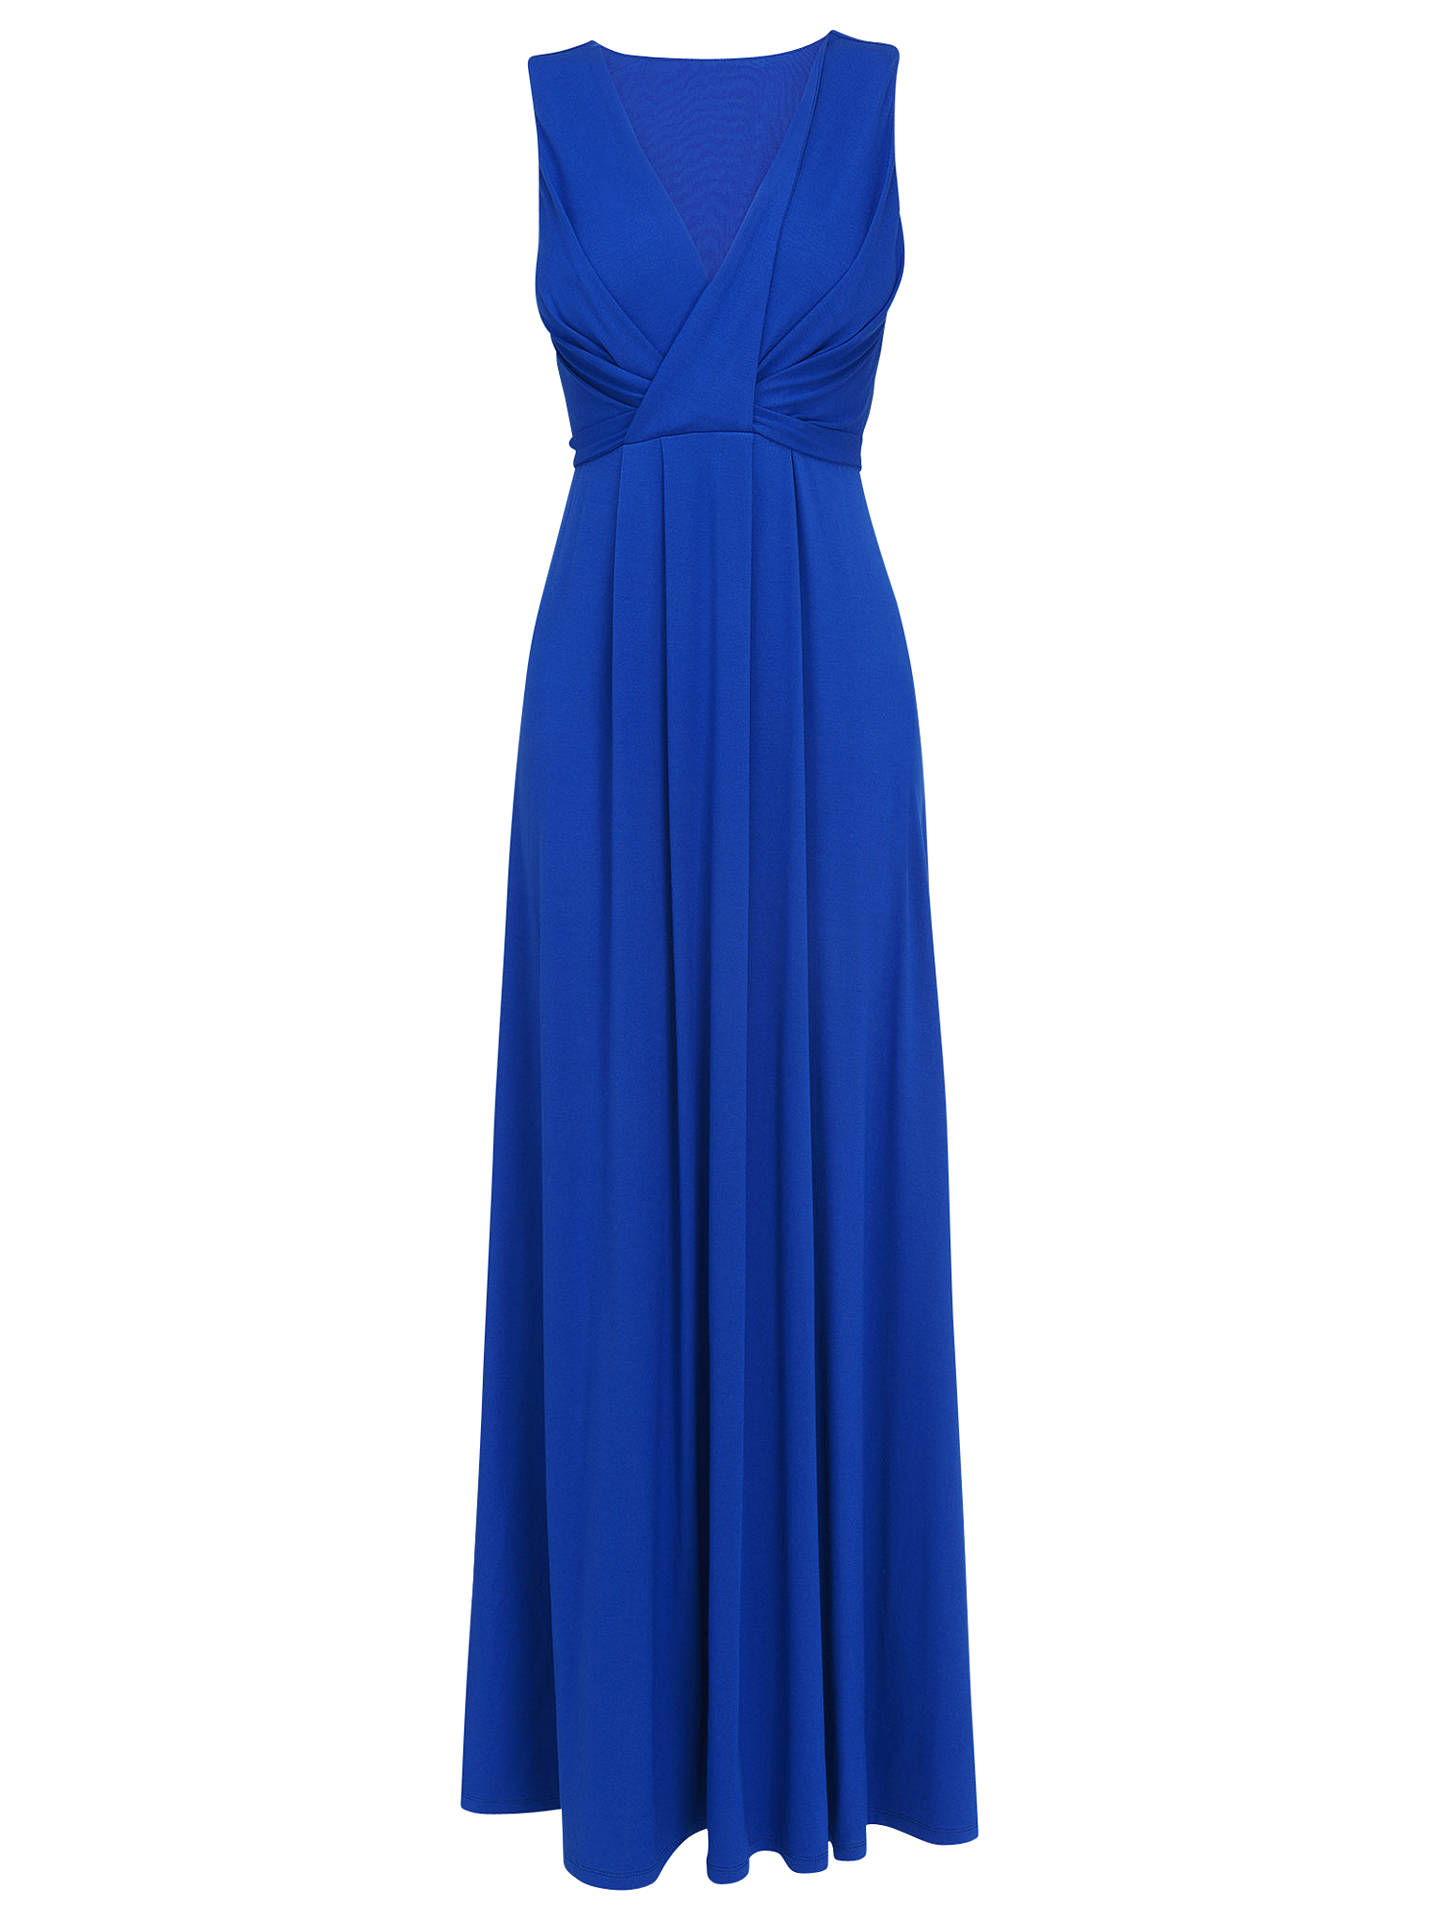 Phase Eight Abby Maxi Dress, Periwinkle at John Lewis & Partners